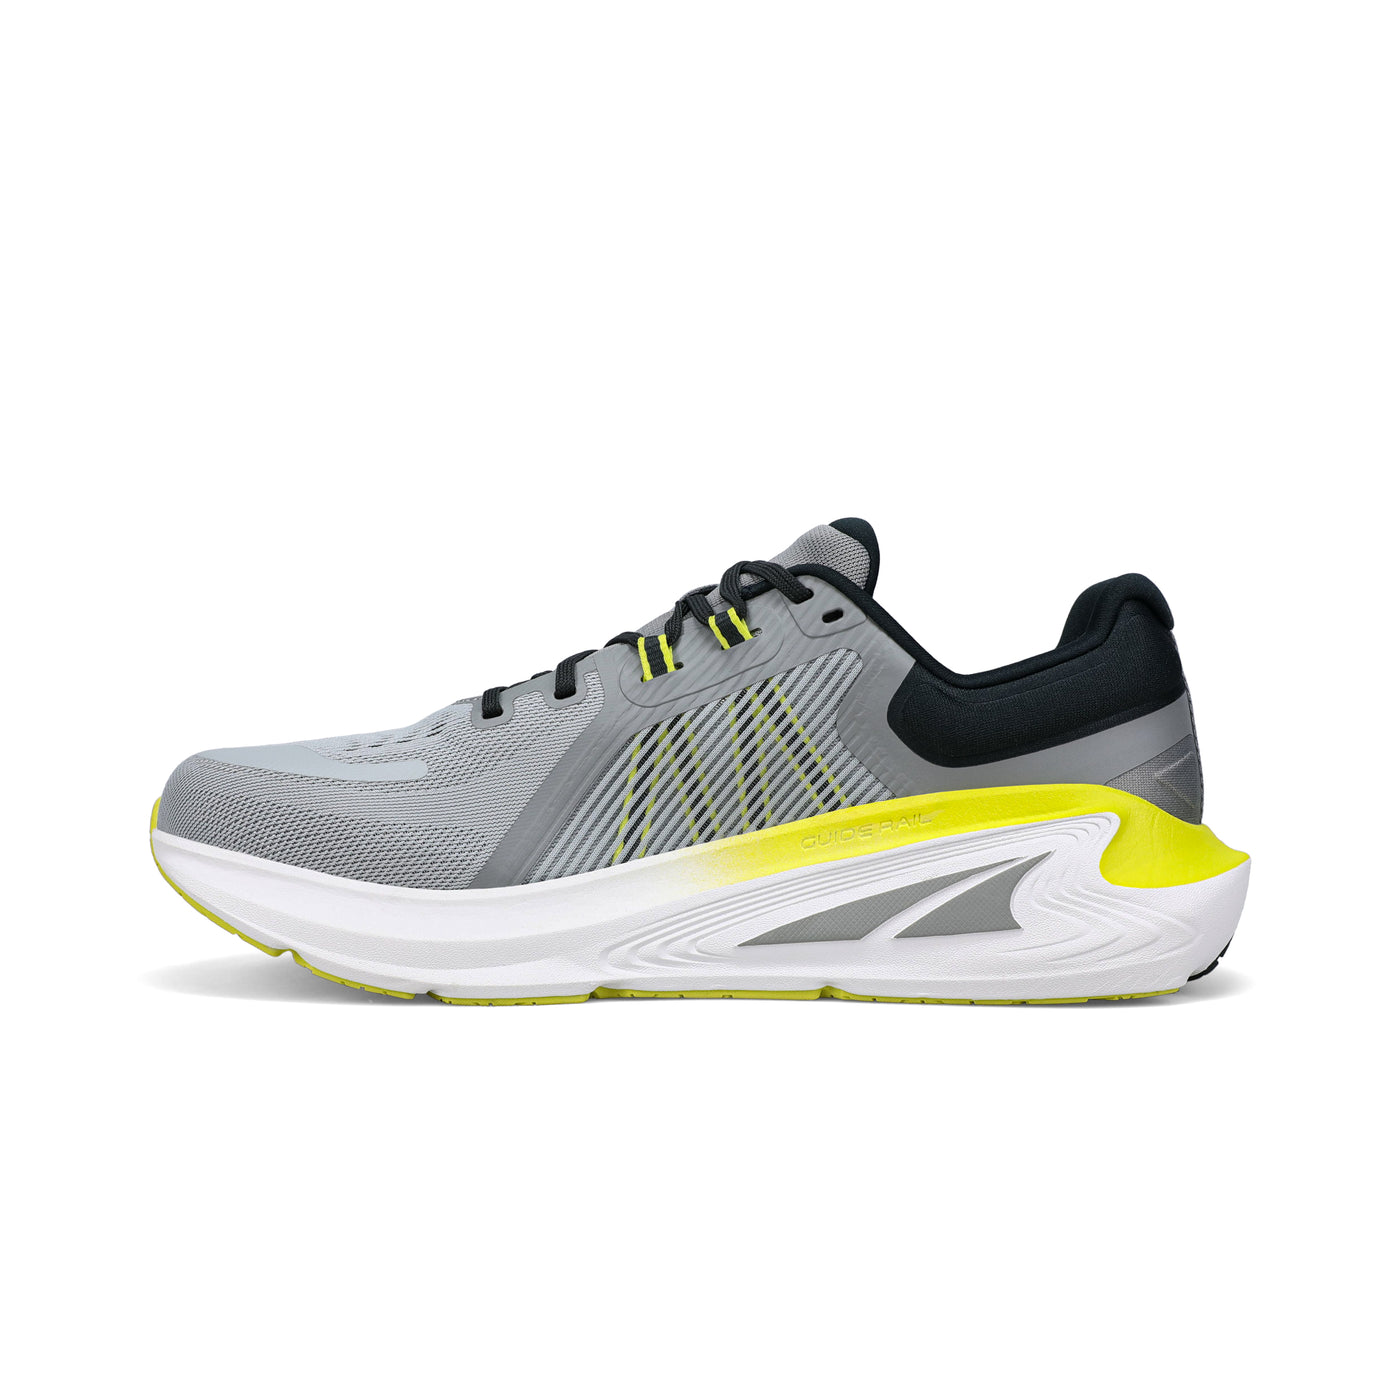 Altra Mens Paradigm 7 - Gray/Lime - Stability